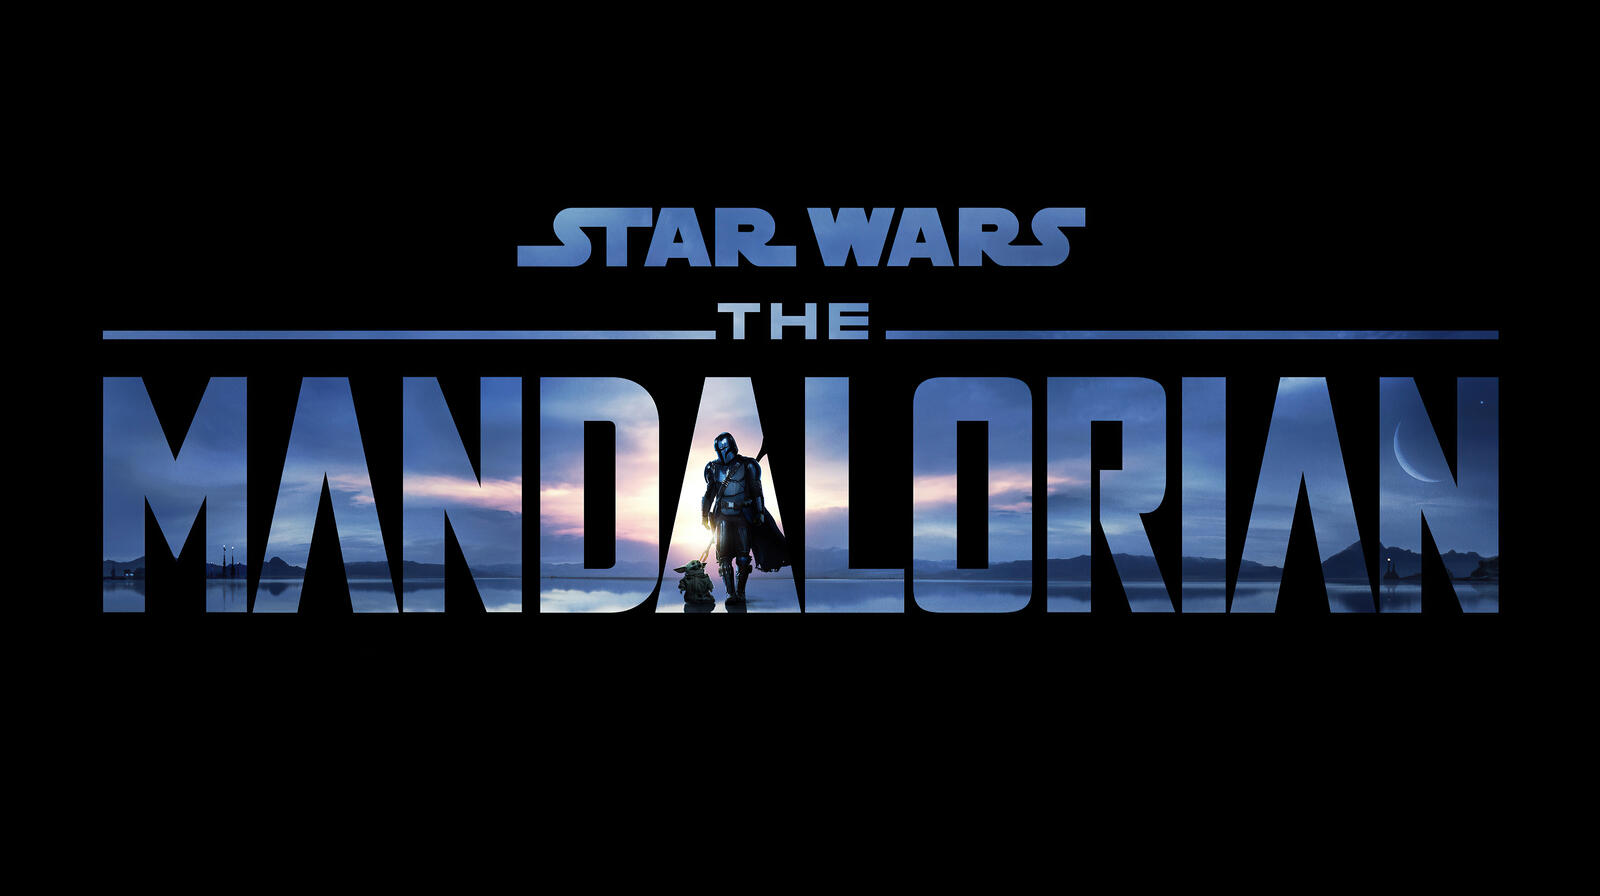 Wallpapers TV show movies the mandalorian on the desktop